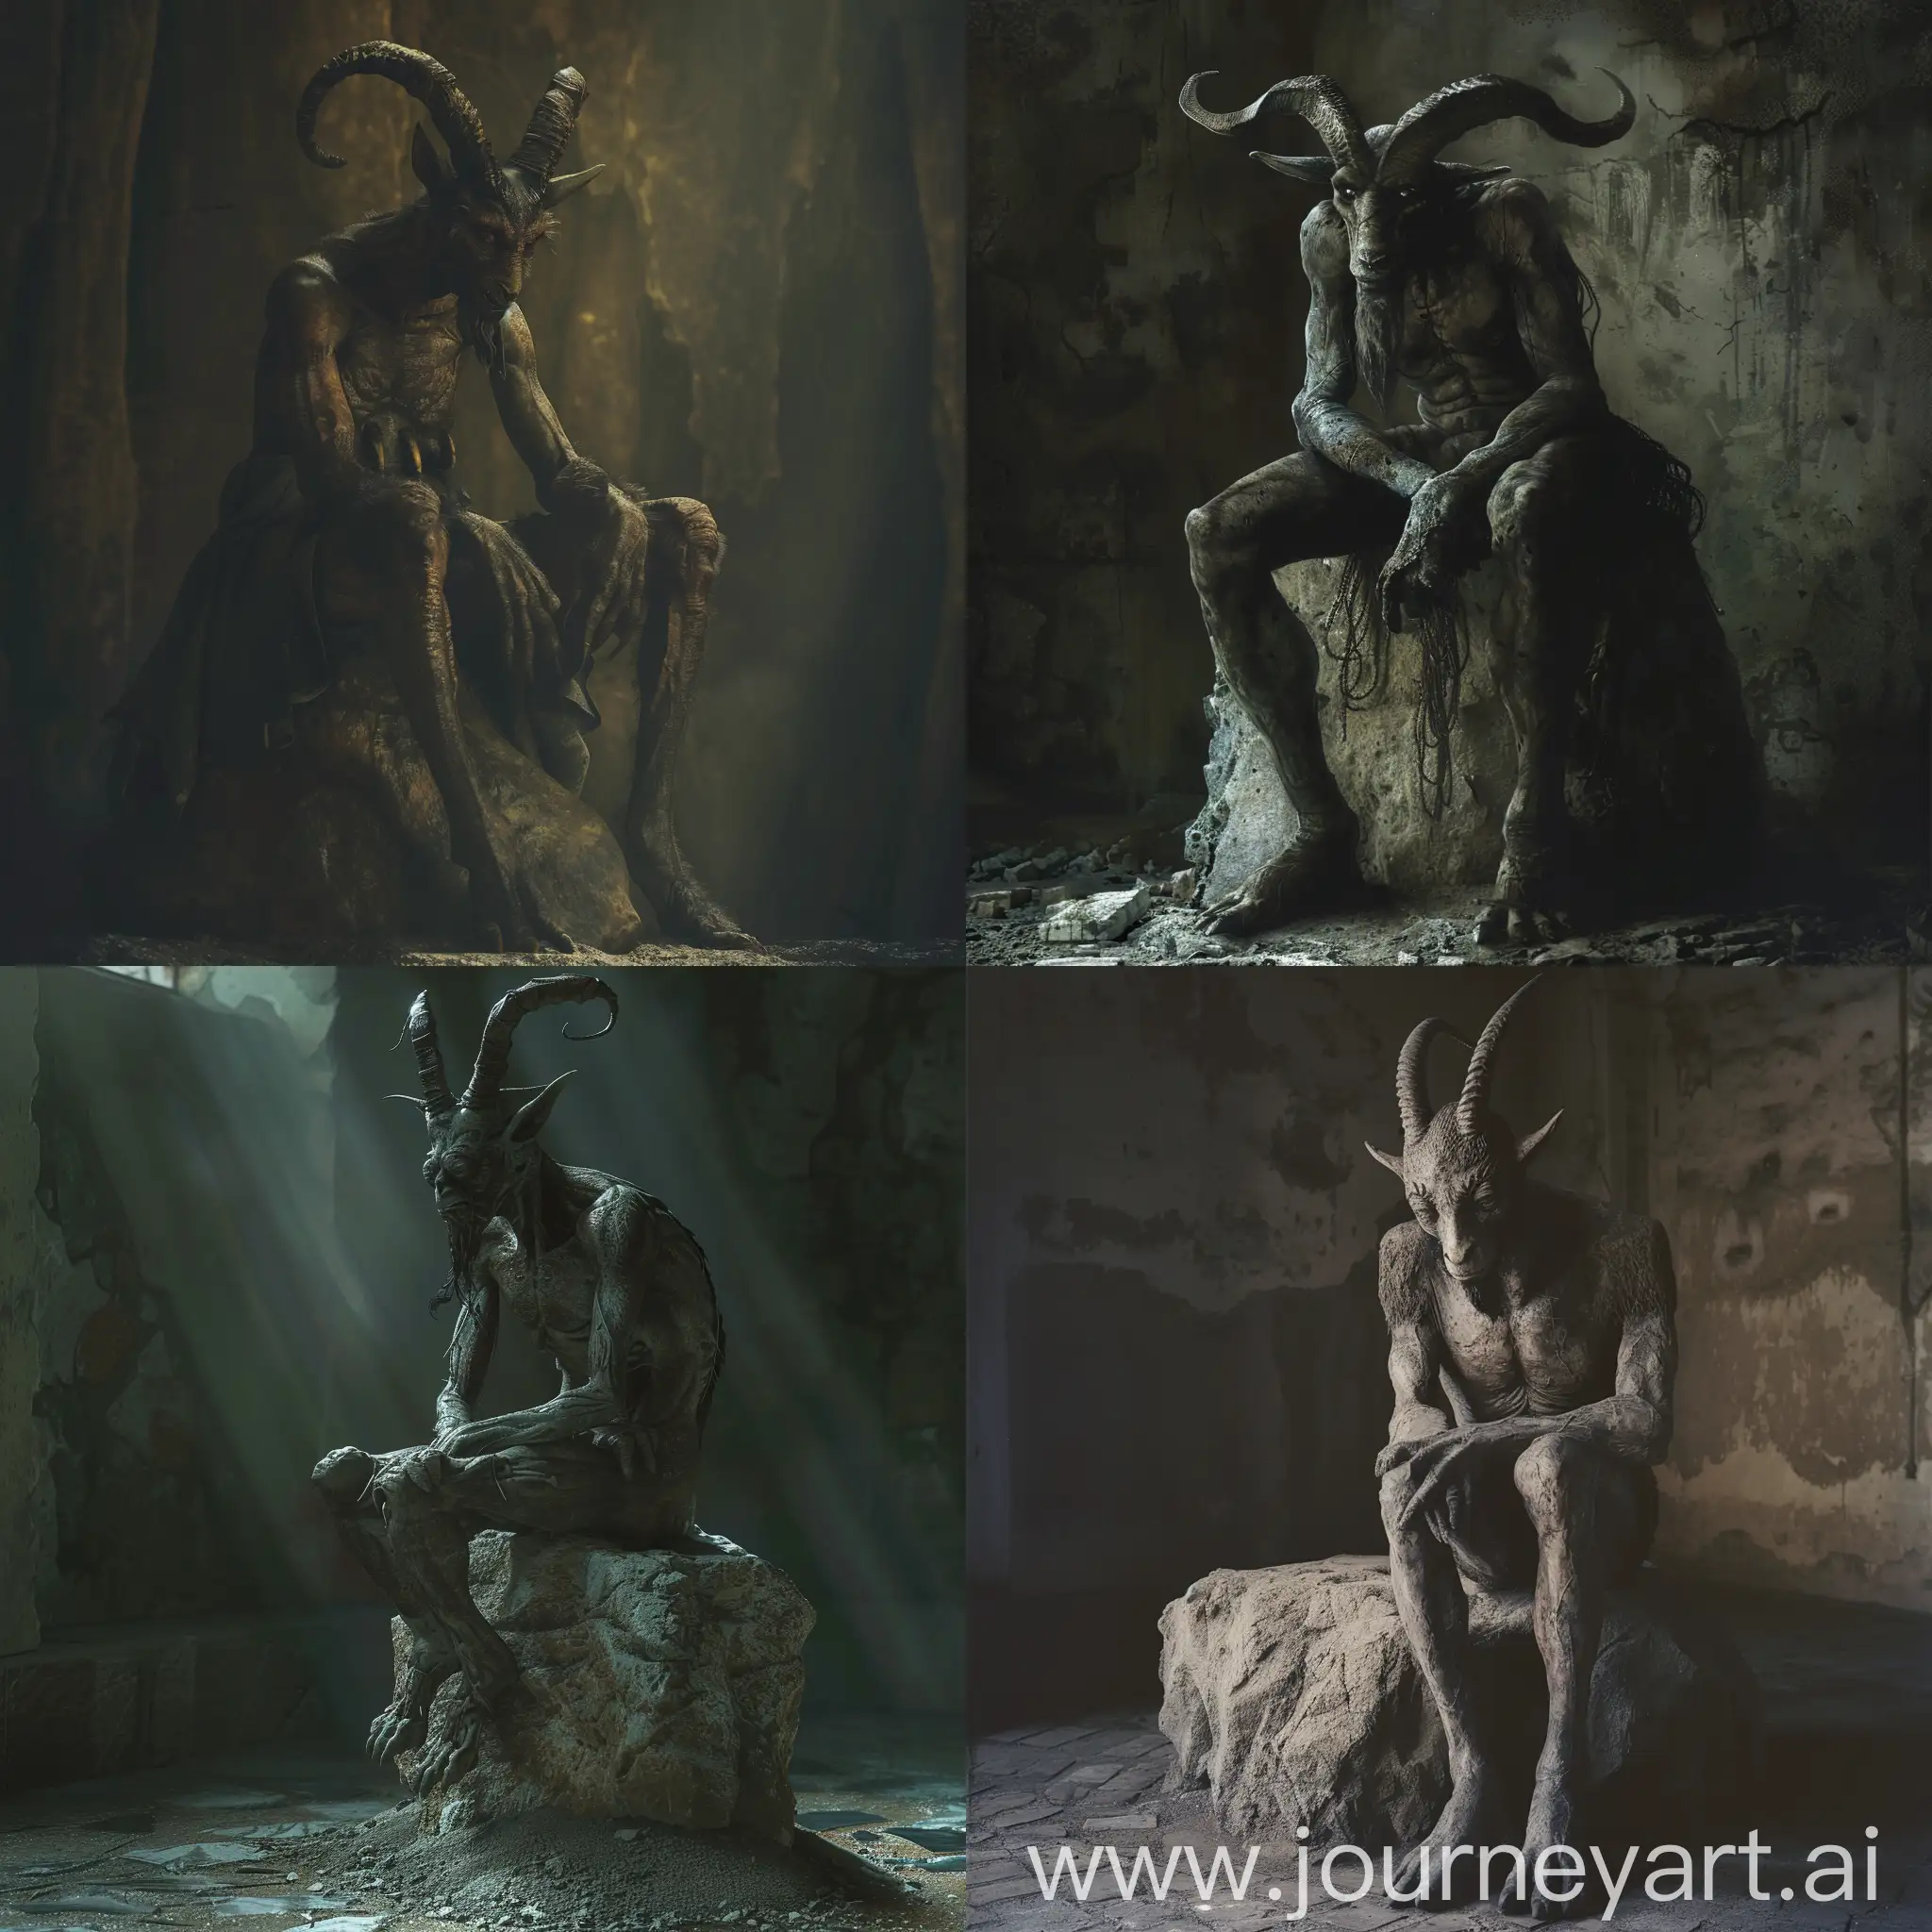 Mysterious-Goat-Demon-Contemplating-in-a-Shadowy-Chamber